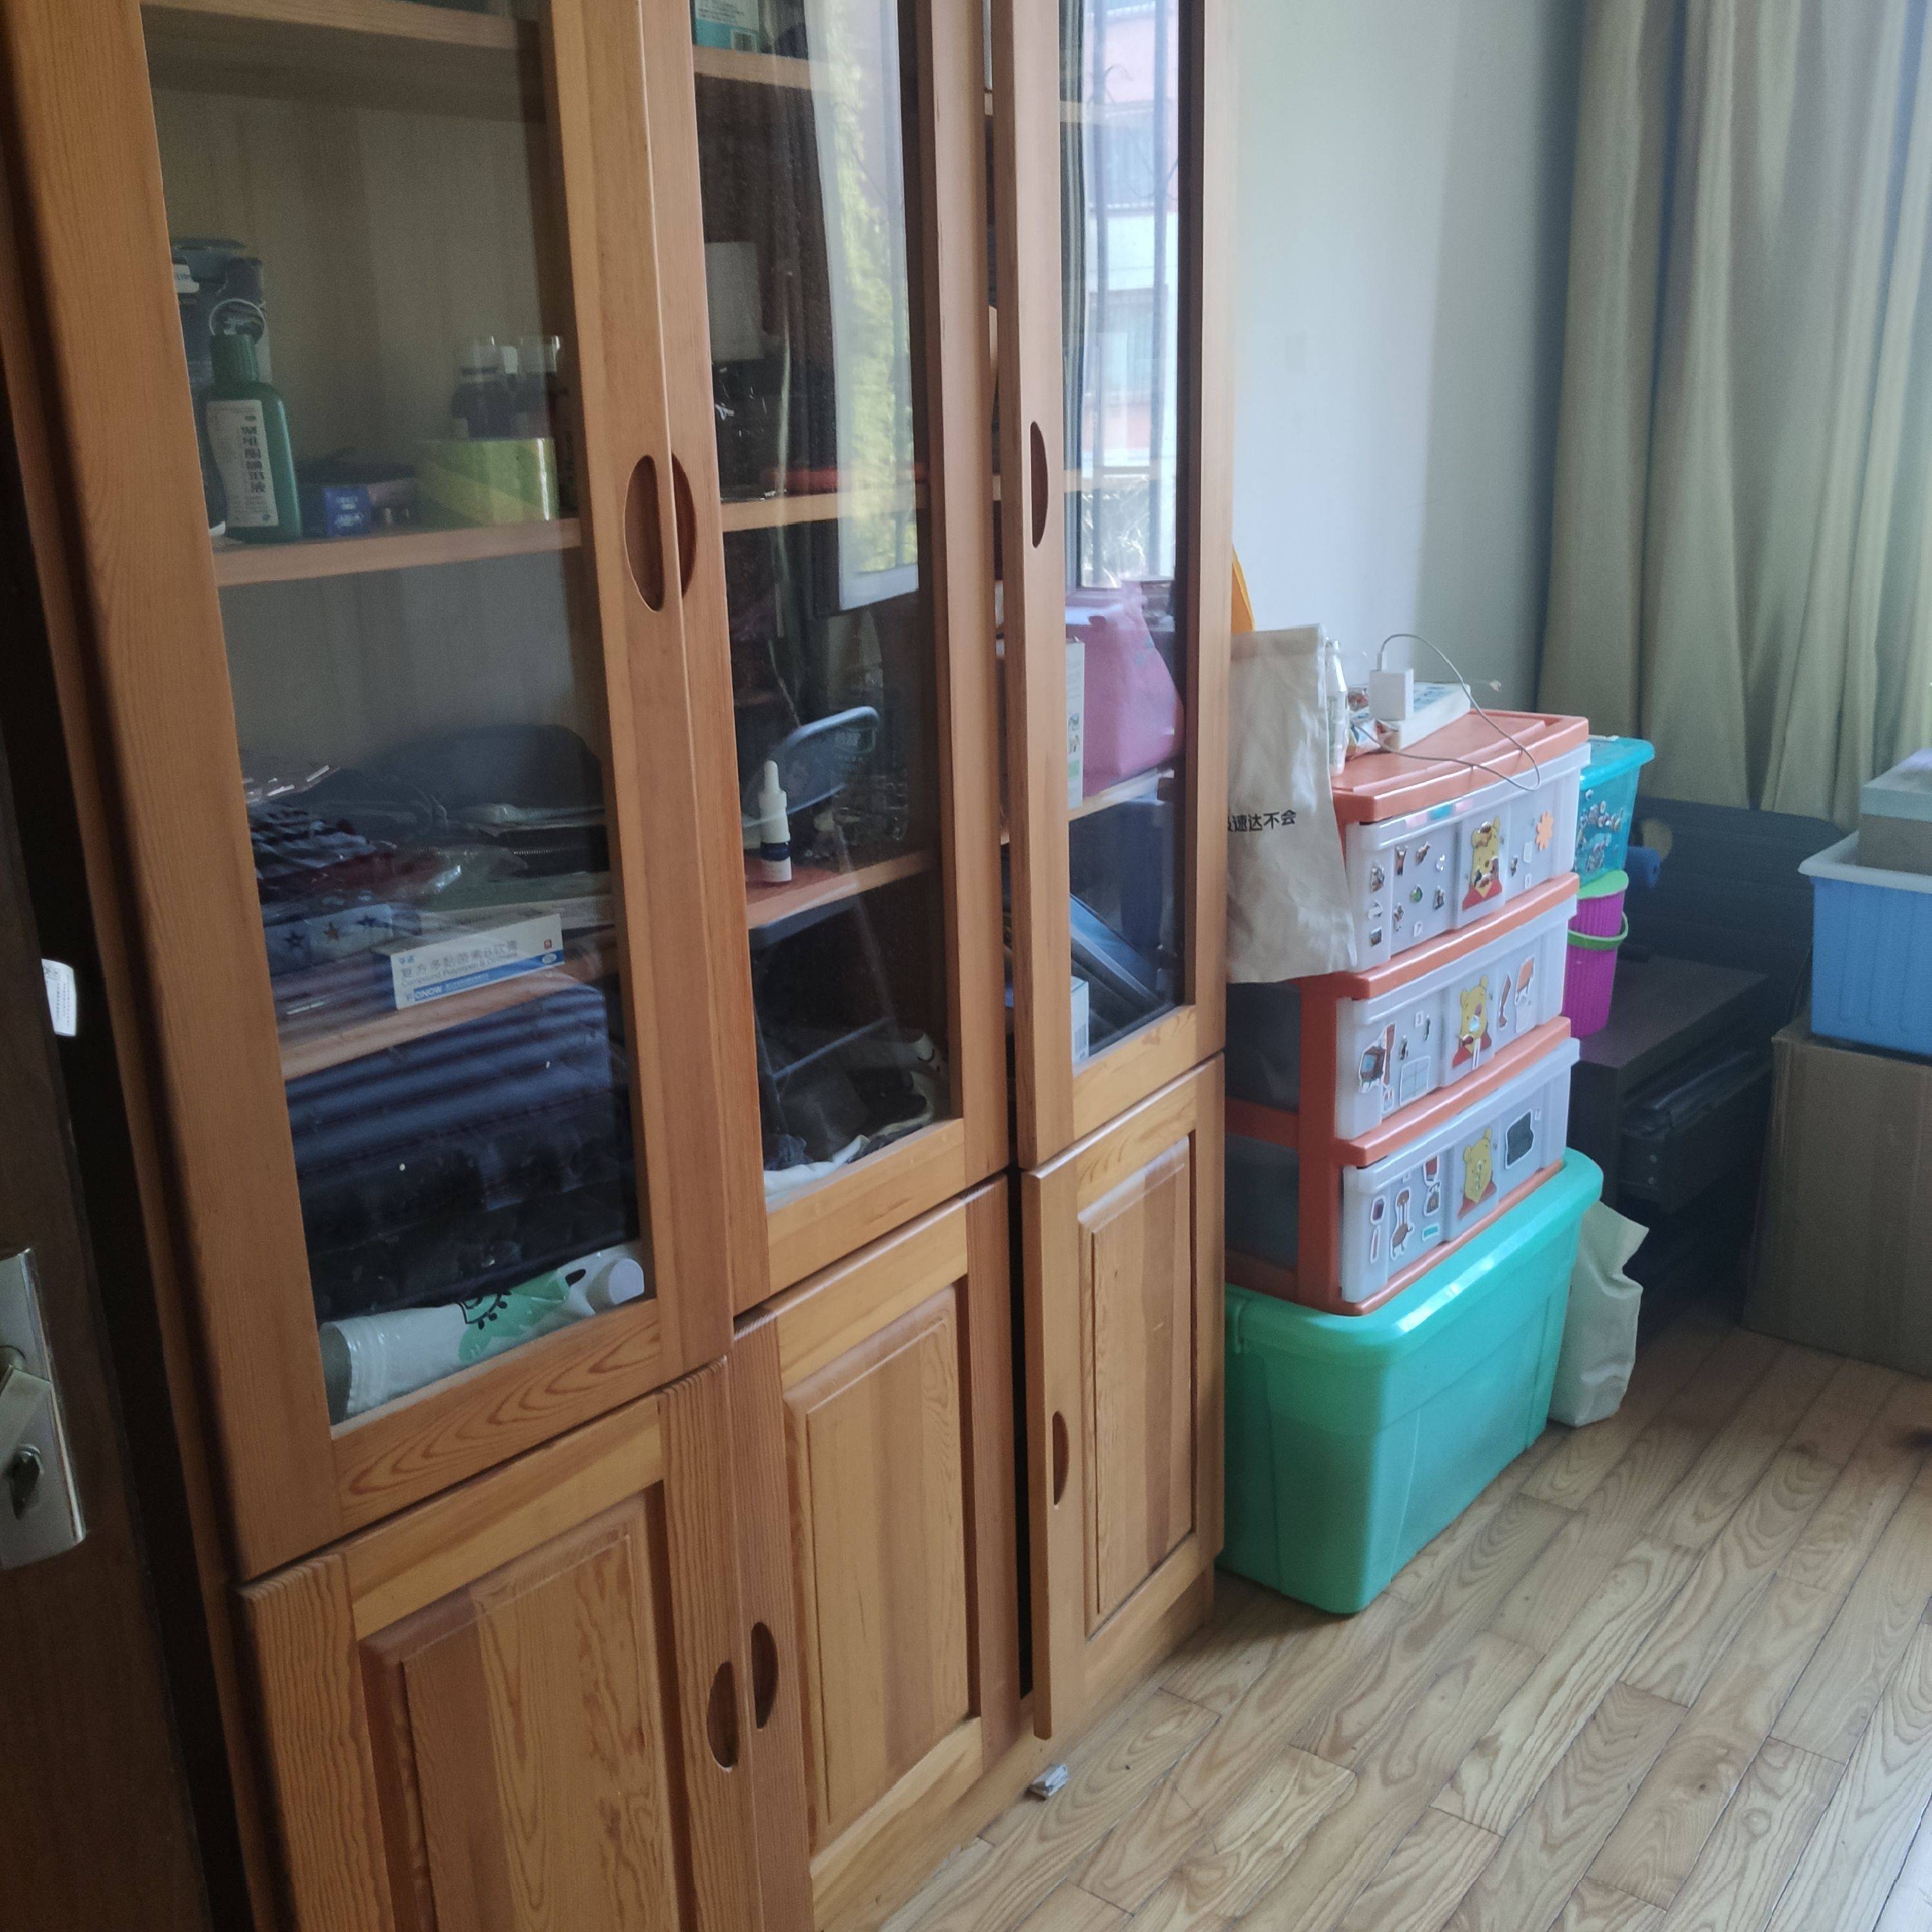 Beijing-Changping-Cozy Home,Clean&Comfy,No Gender Limit,Chilled,LGBTQ Friendly,Pet Friendly